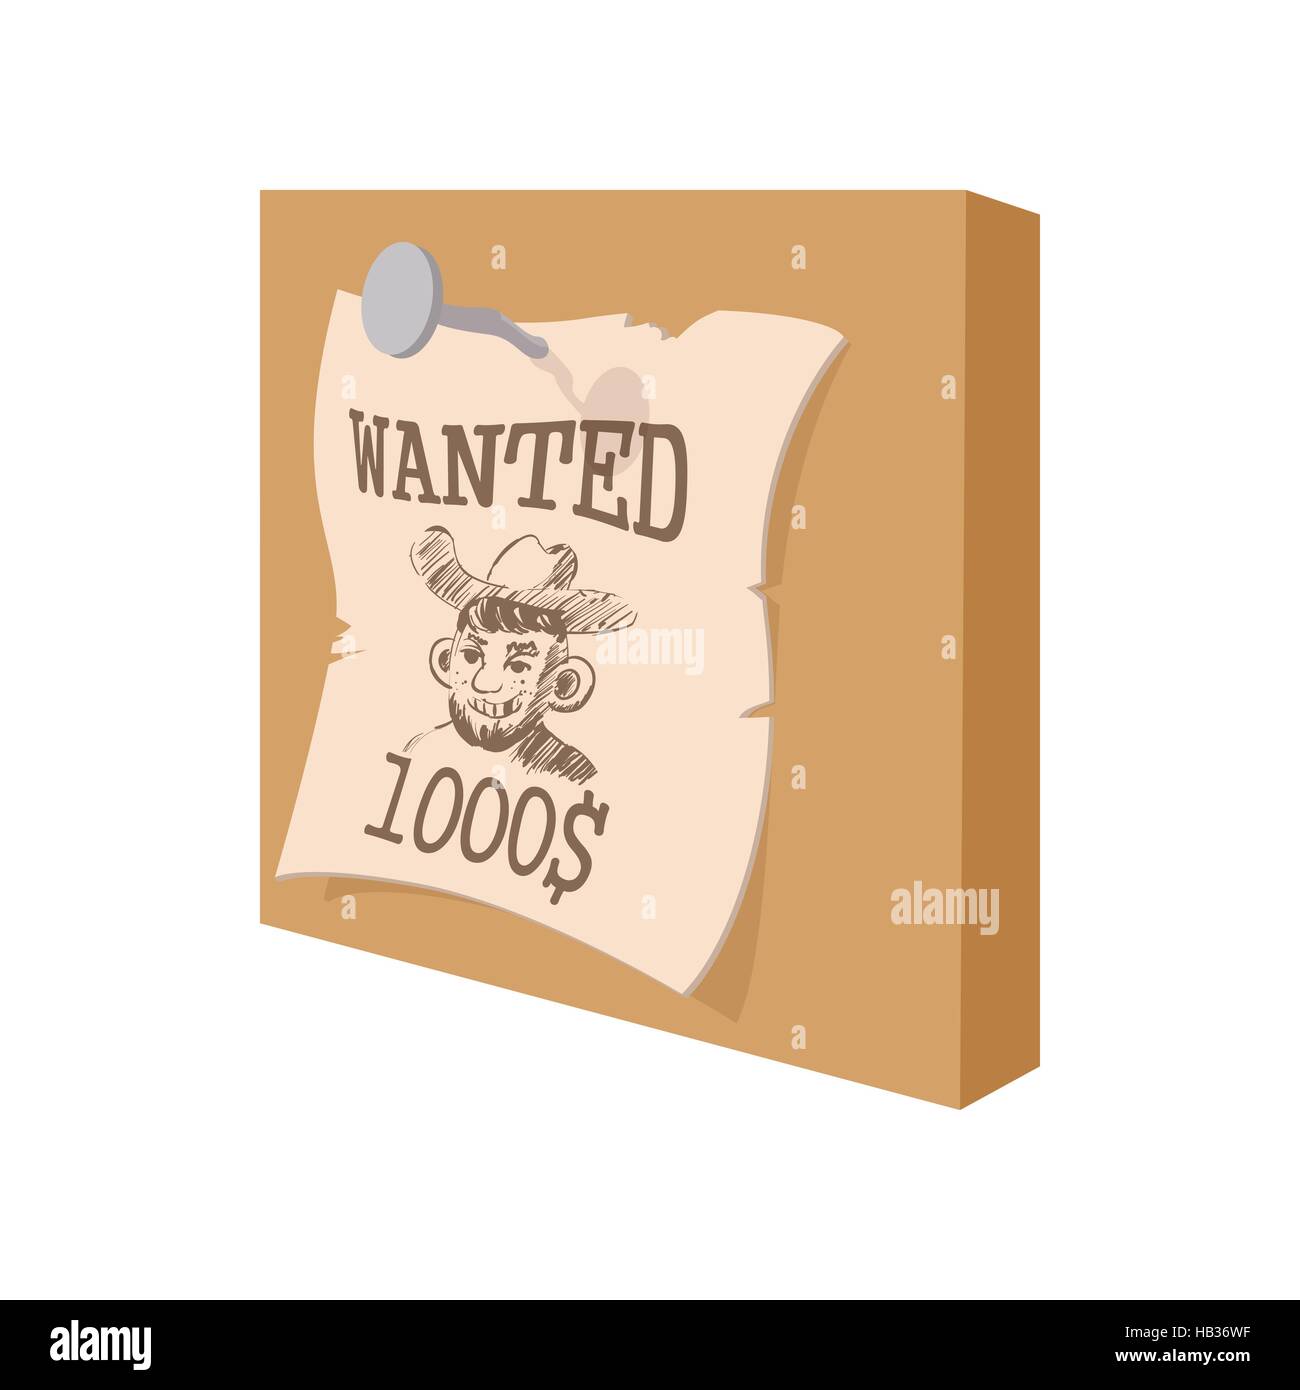 Vintage western wanted poster cartoon icon Stock Vector